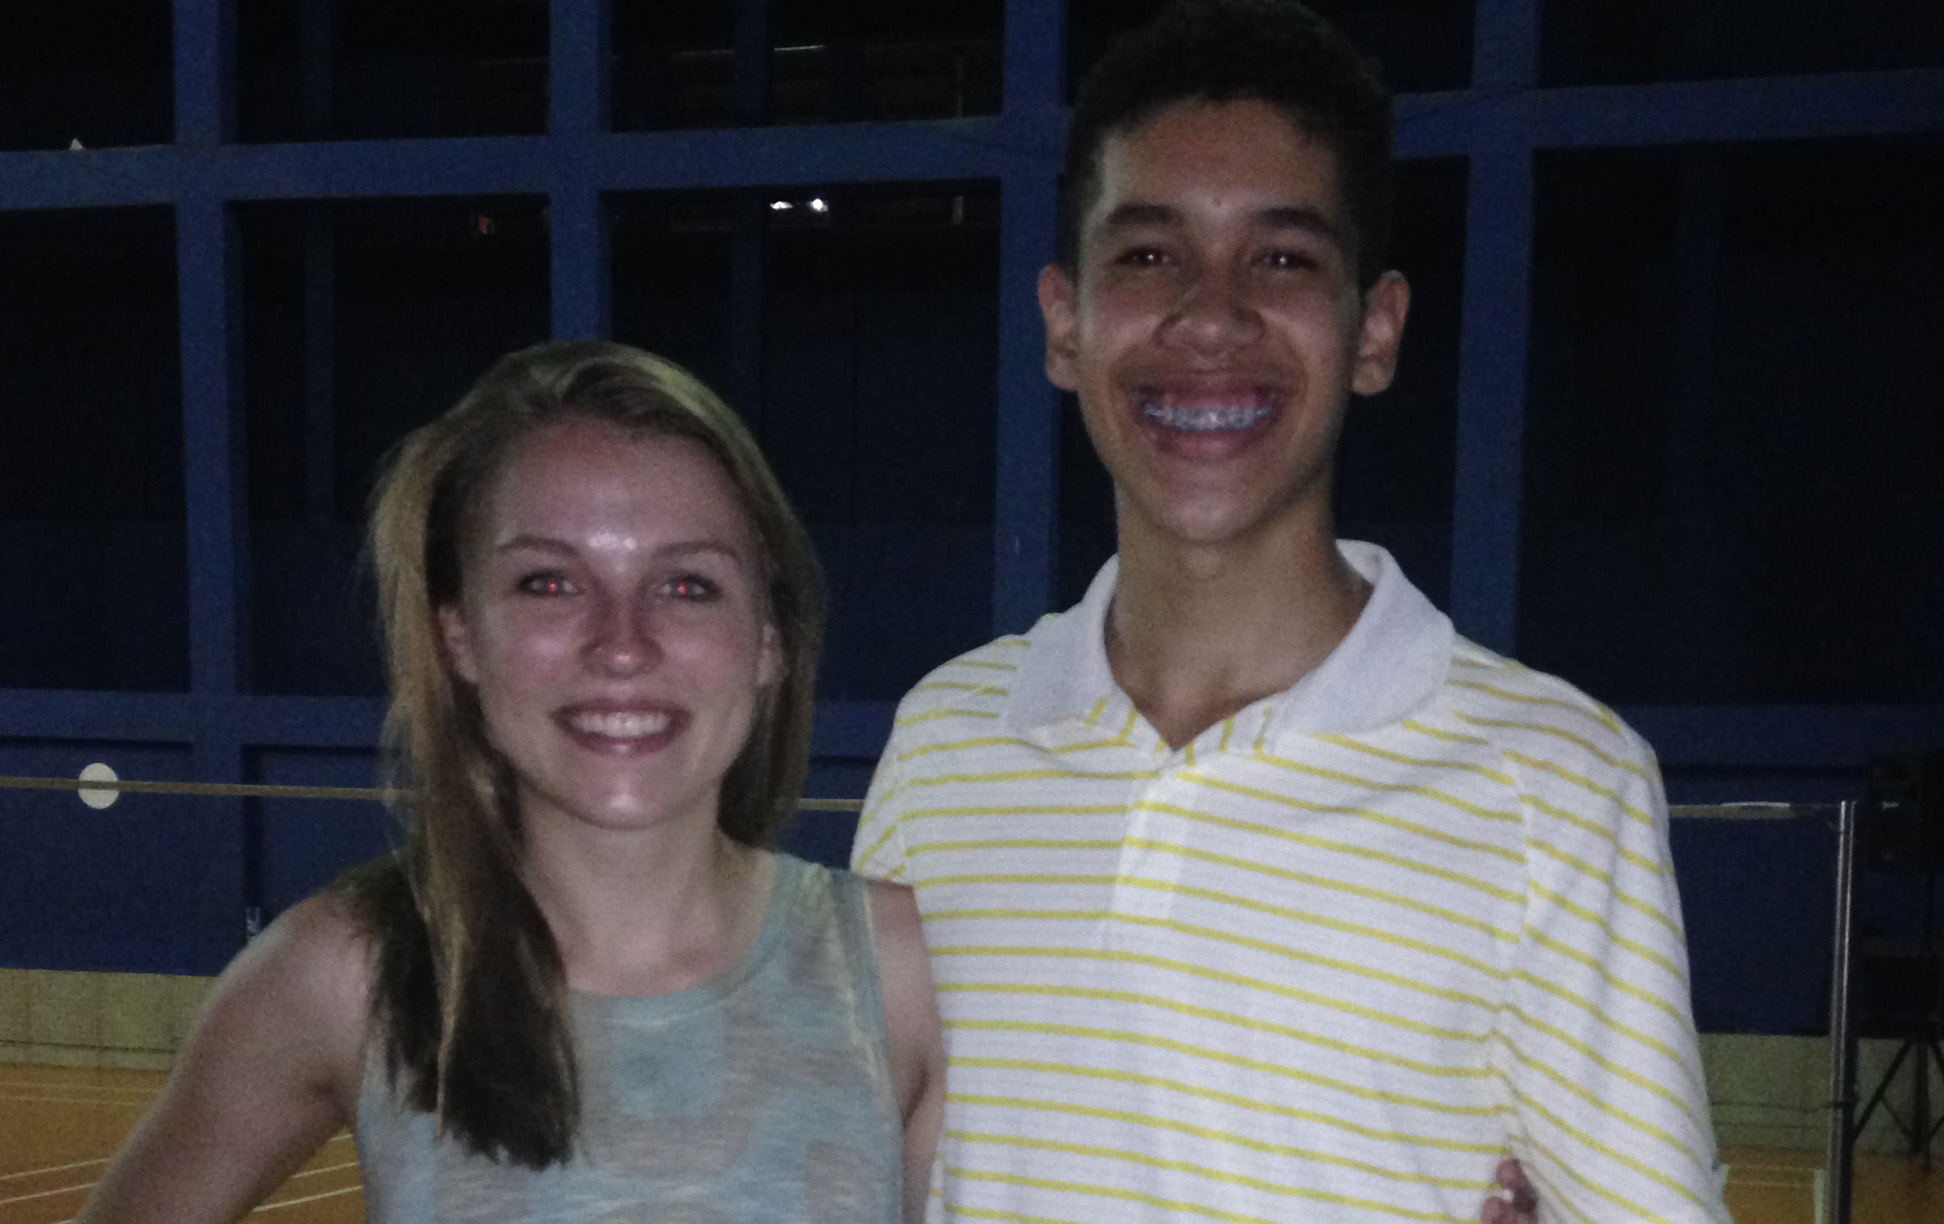 Hannah Musall, Georgia Tech student, left, with Miratus badminton player Jonathan Santos during her visit to Rio in 2015.